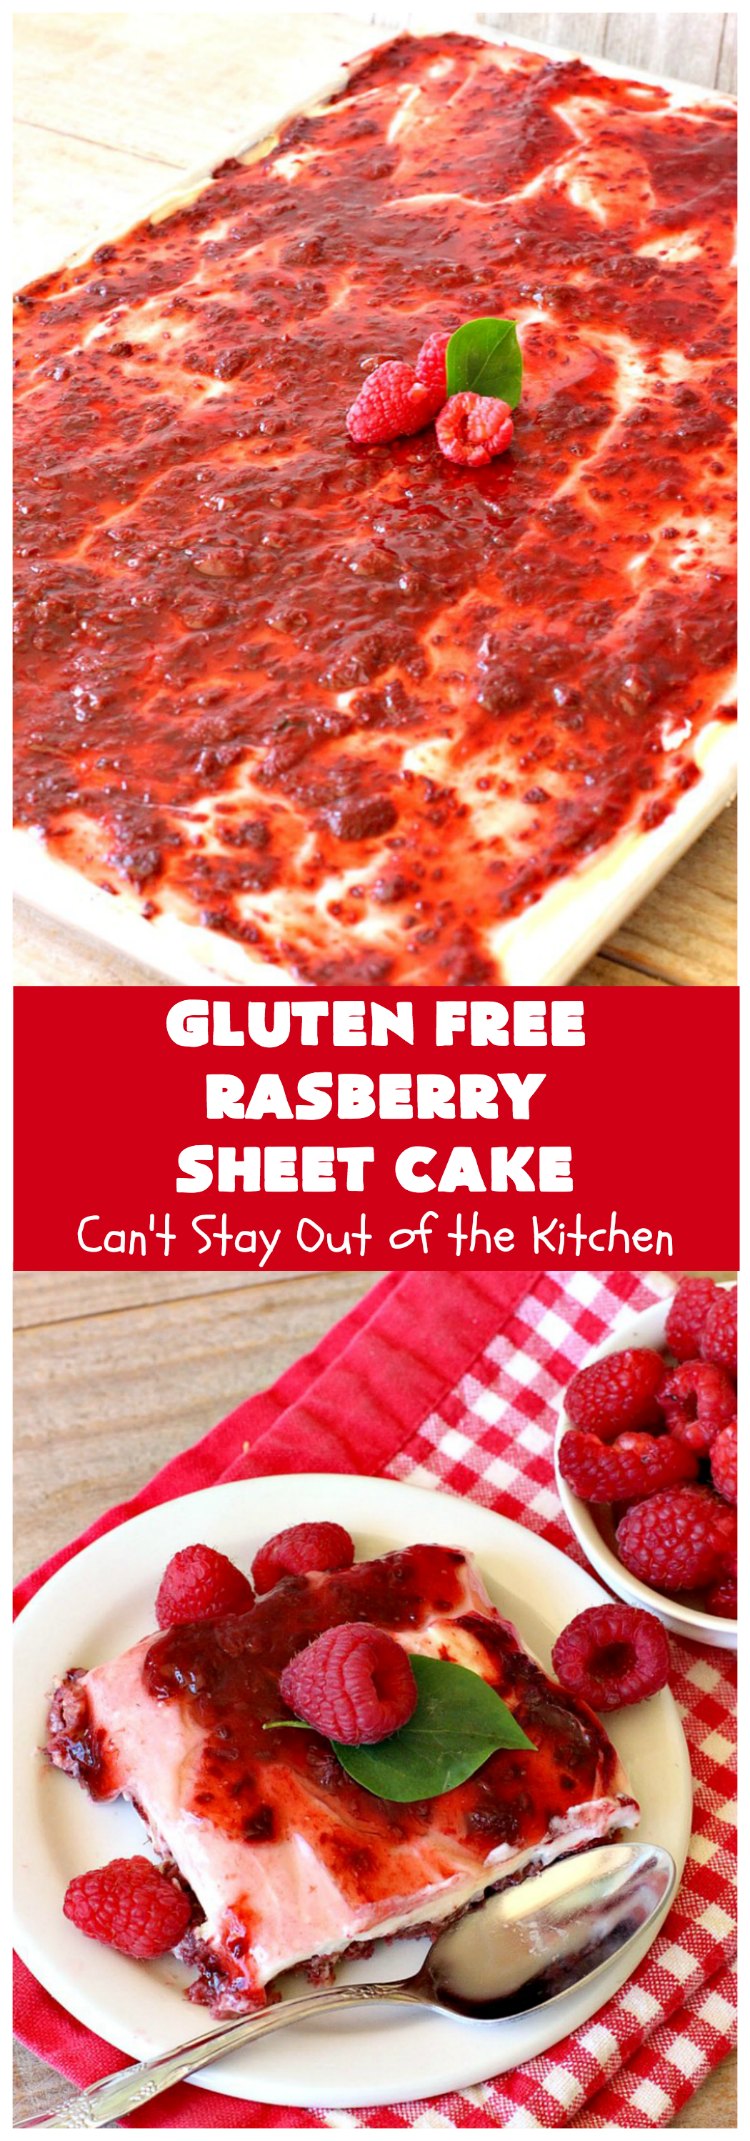 Gluten Free Raspberry Sheet Cake | Can't Stay Out of the Kitchen | this luscious #raspberry #cake will knock your socks off! It's terrific for #Christmas, #ValentinesDay or other #holidays. #Dessert #HolidayDessert #RaspberryDessert #GlutenFree #RaspberrySheetCake #GlutenFreeRaspberrySheetCake